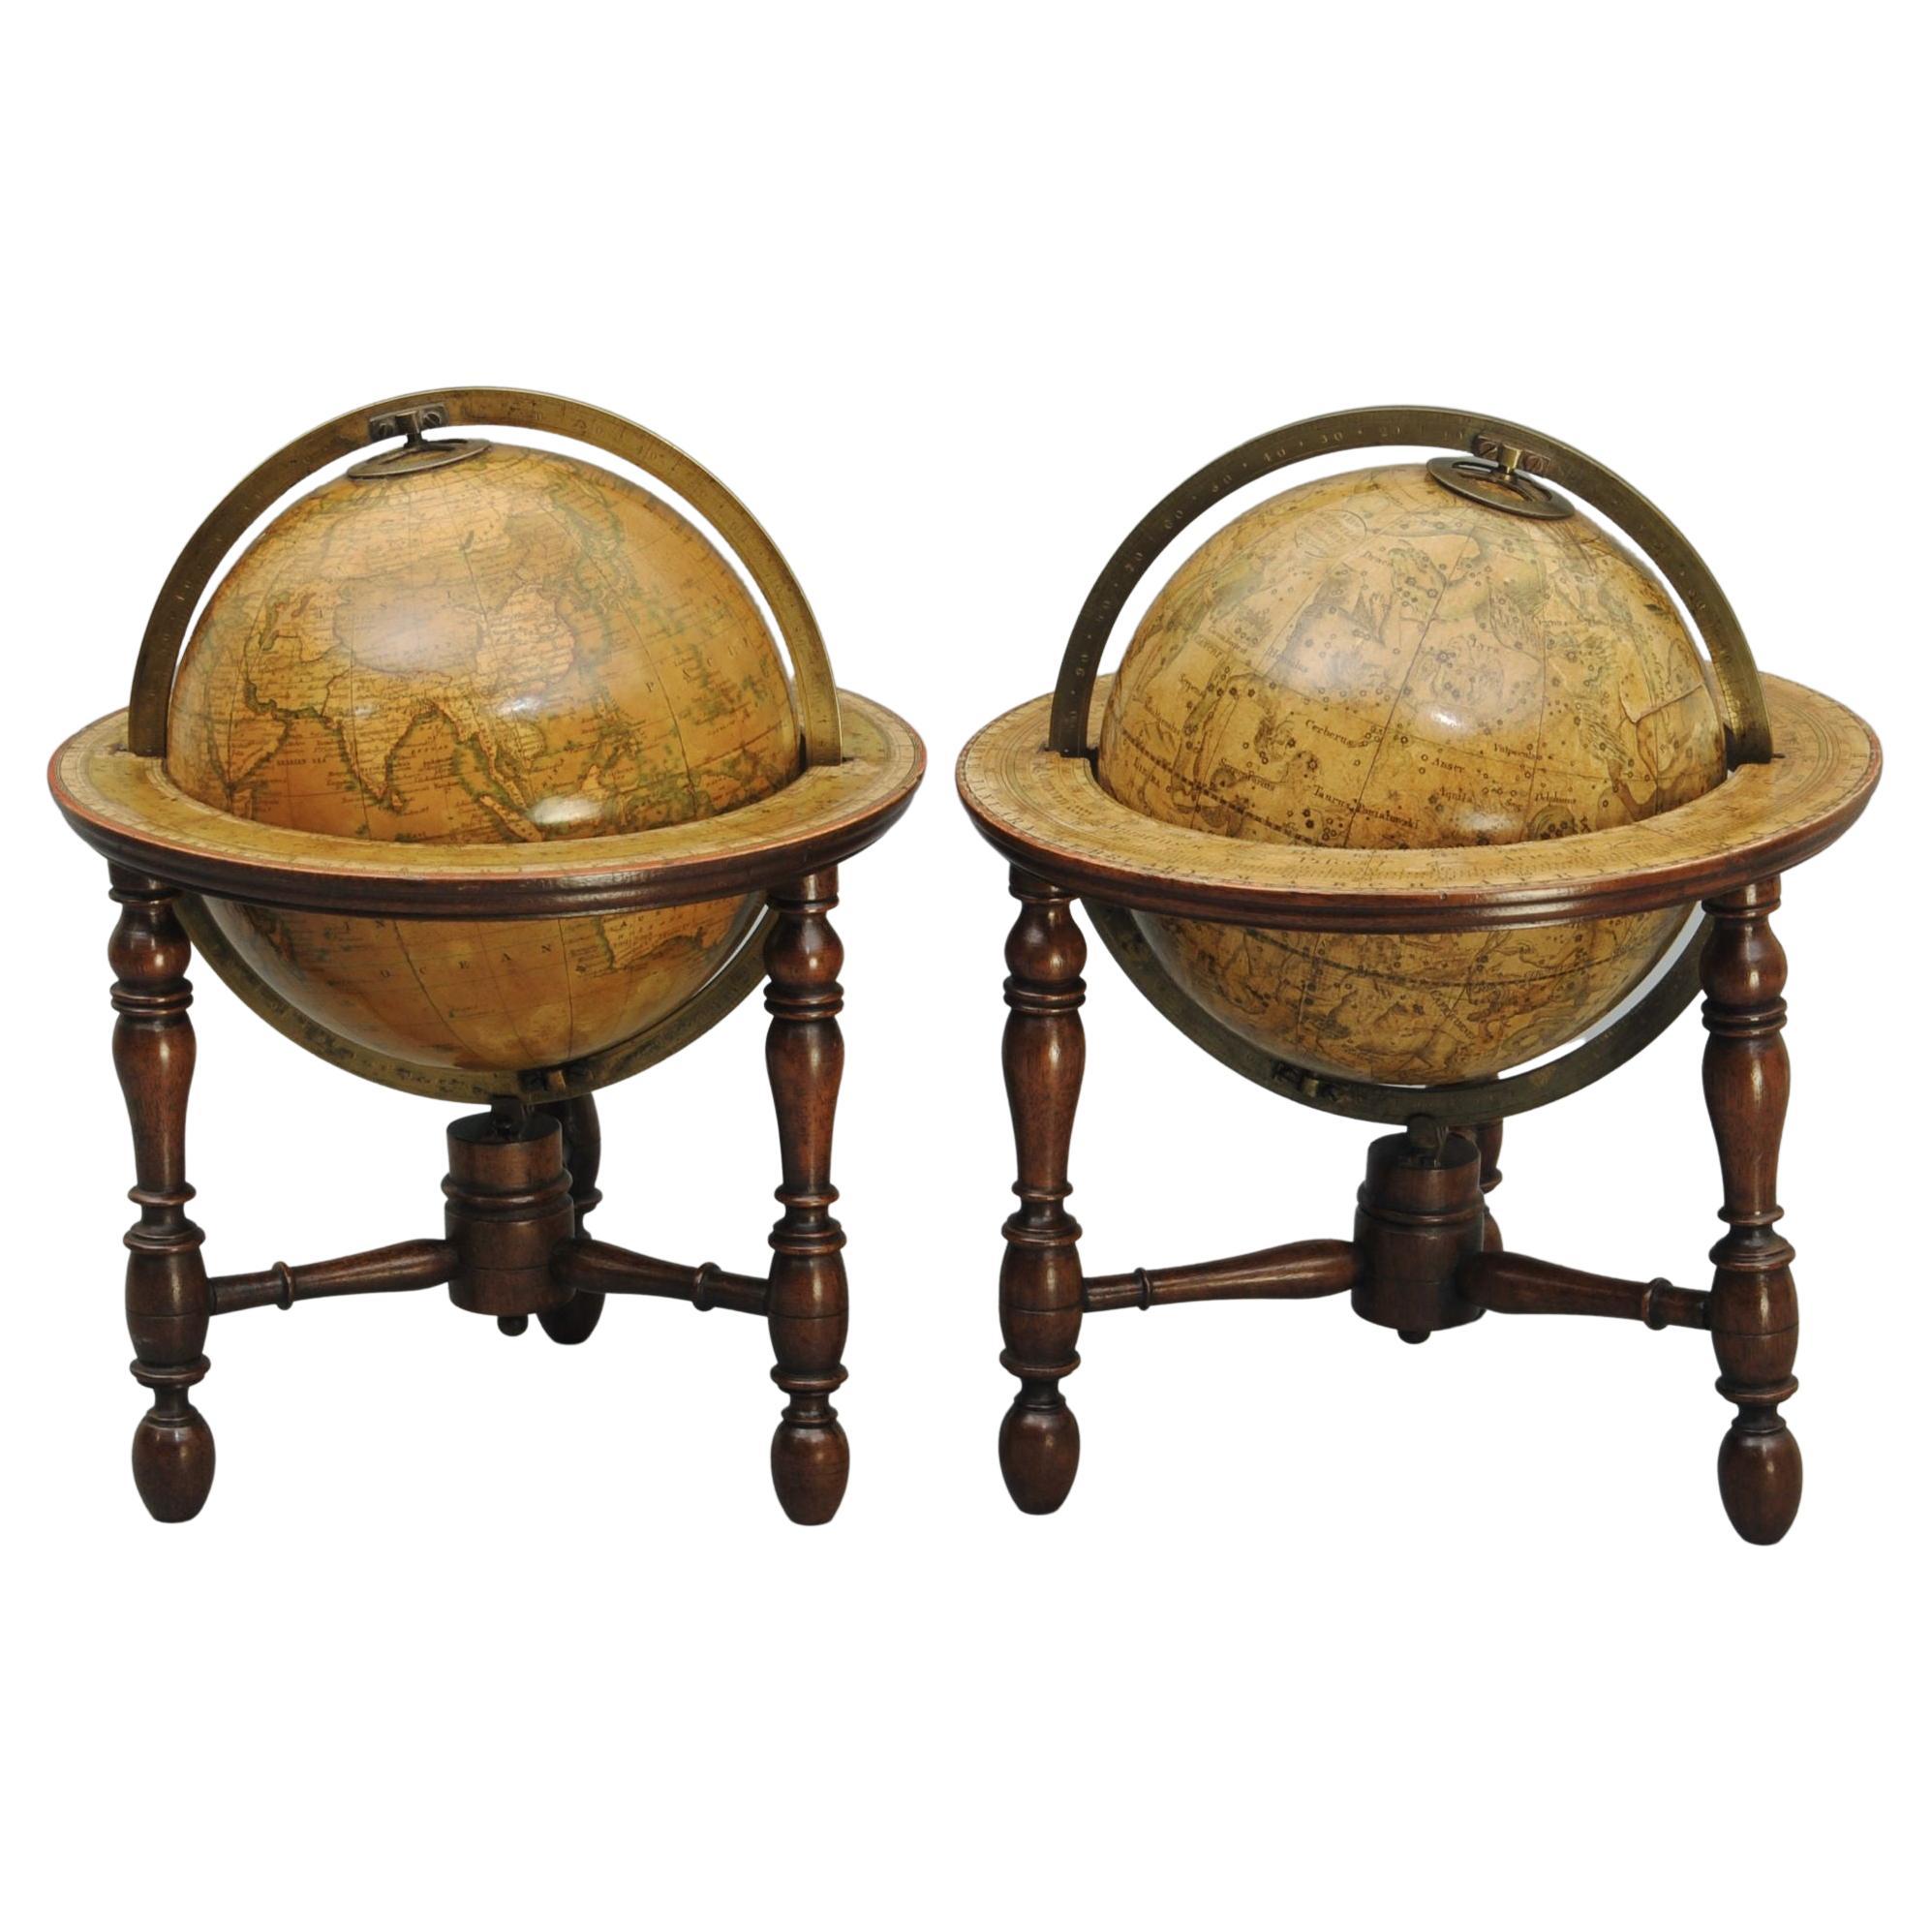 Early 19th Century Pair of Newton Table Globes